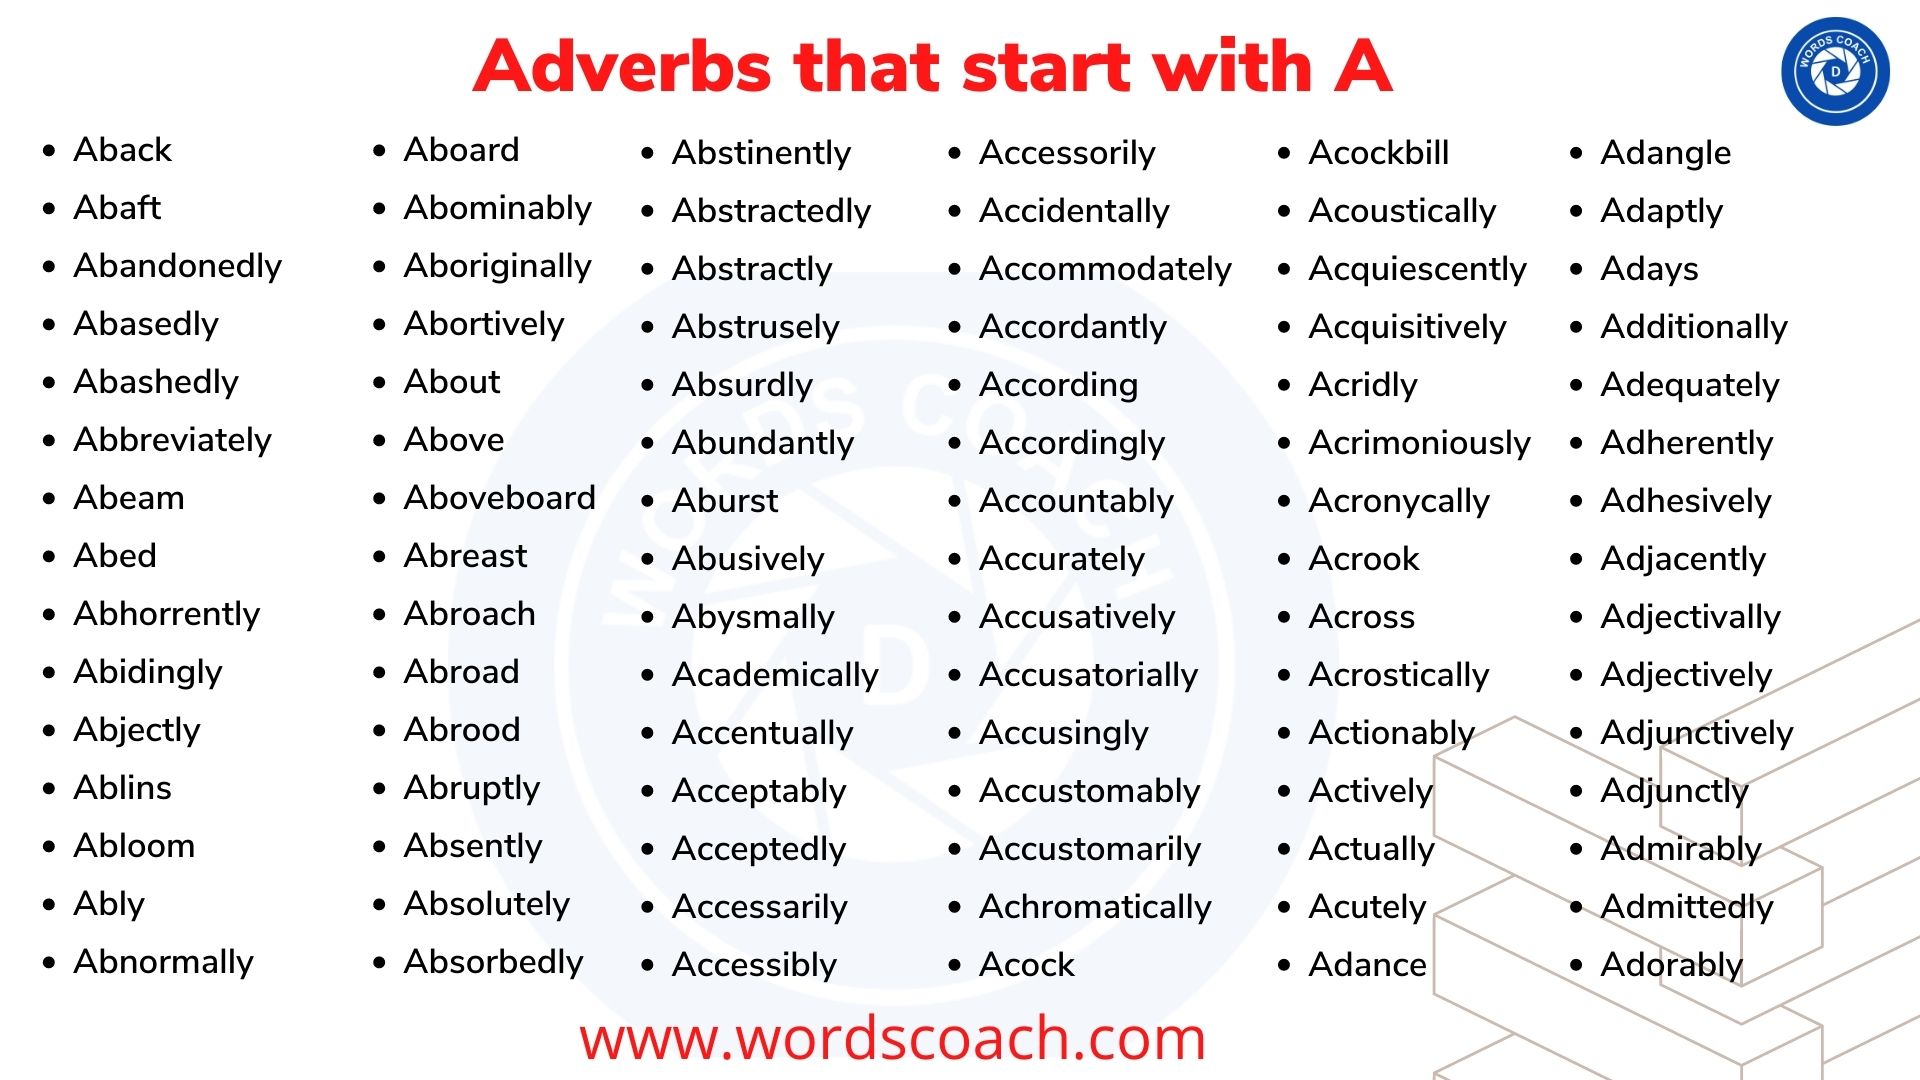 Adverbs that start with A - wordscoach.com